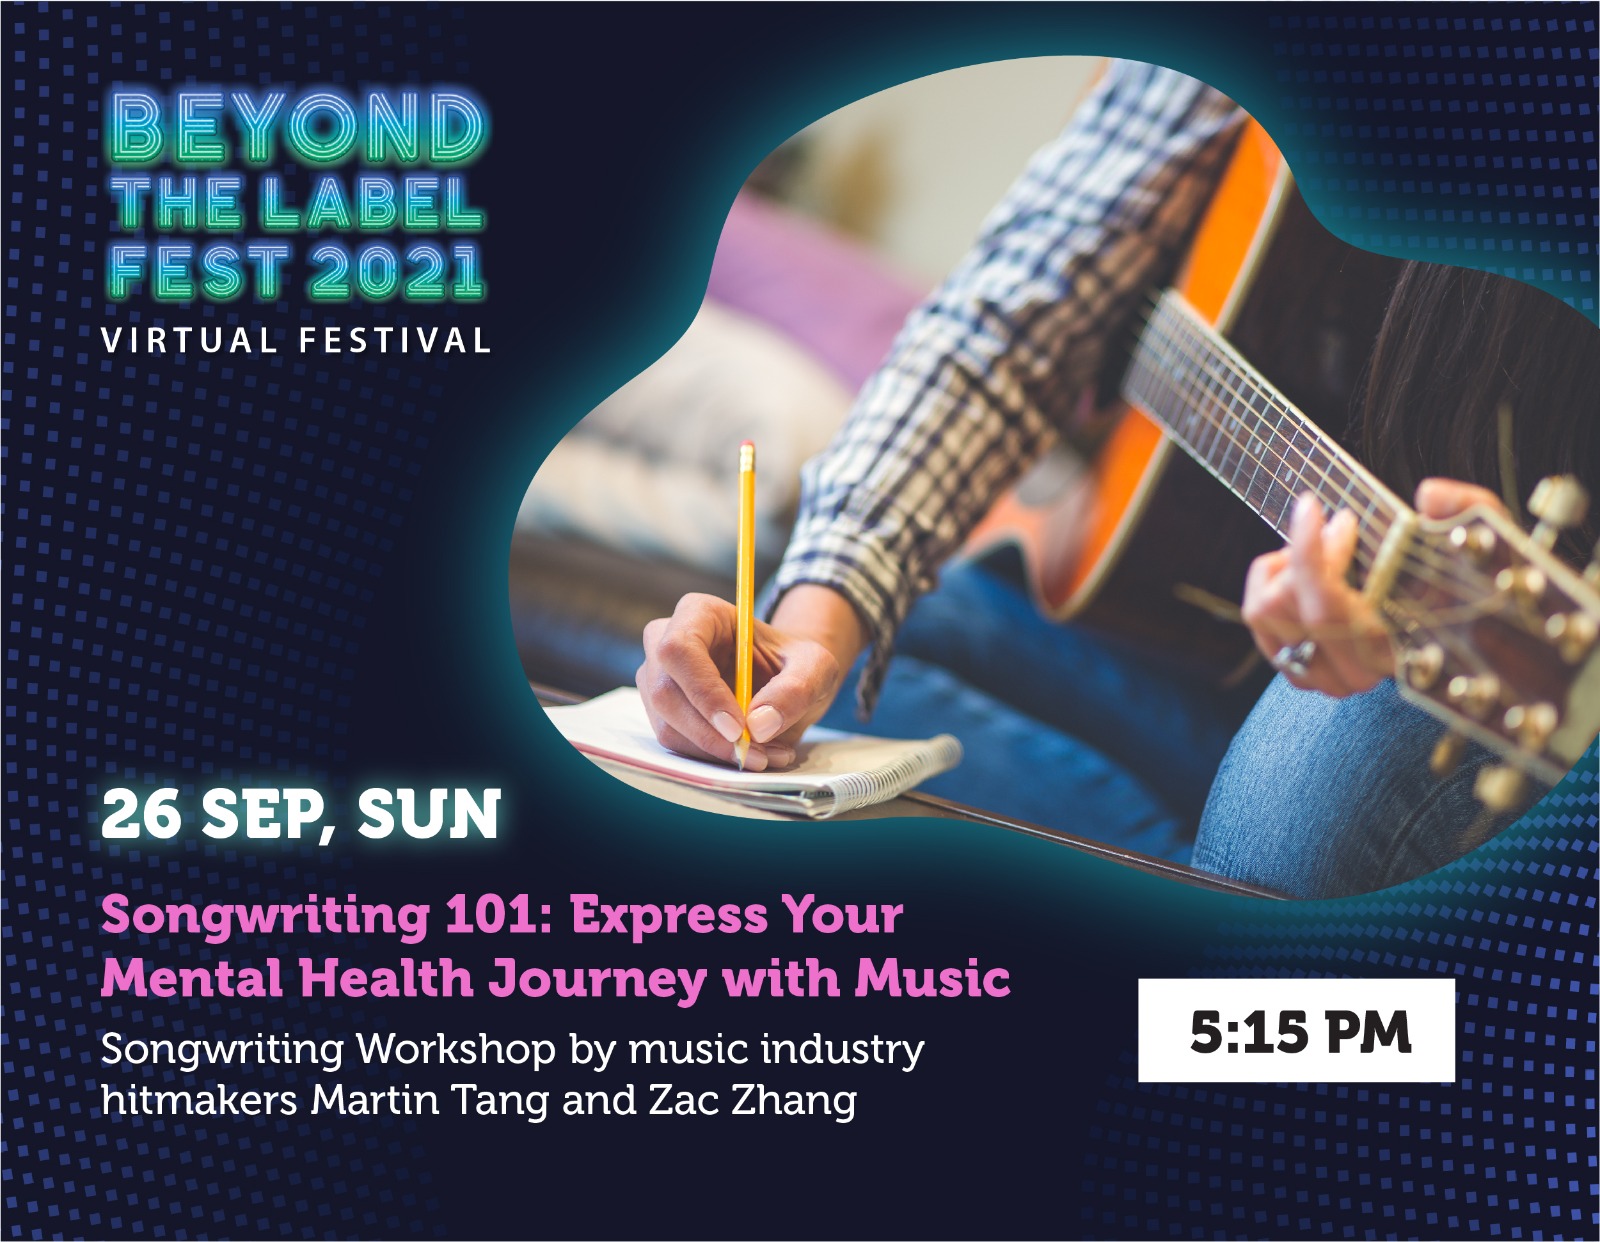 Songwriting 101: Express Your Mental Health Journey With Music 